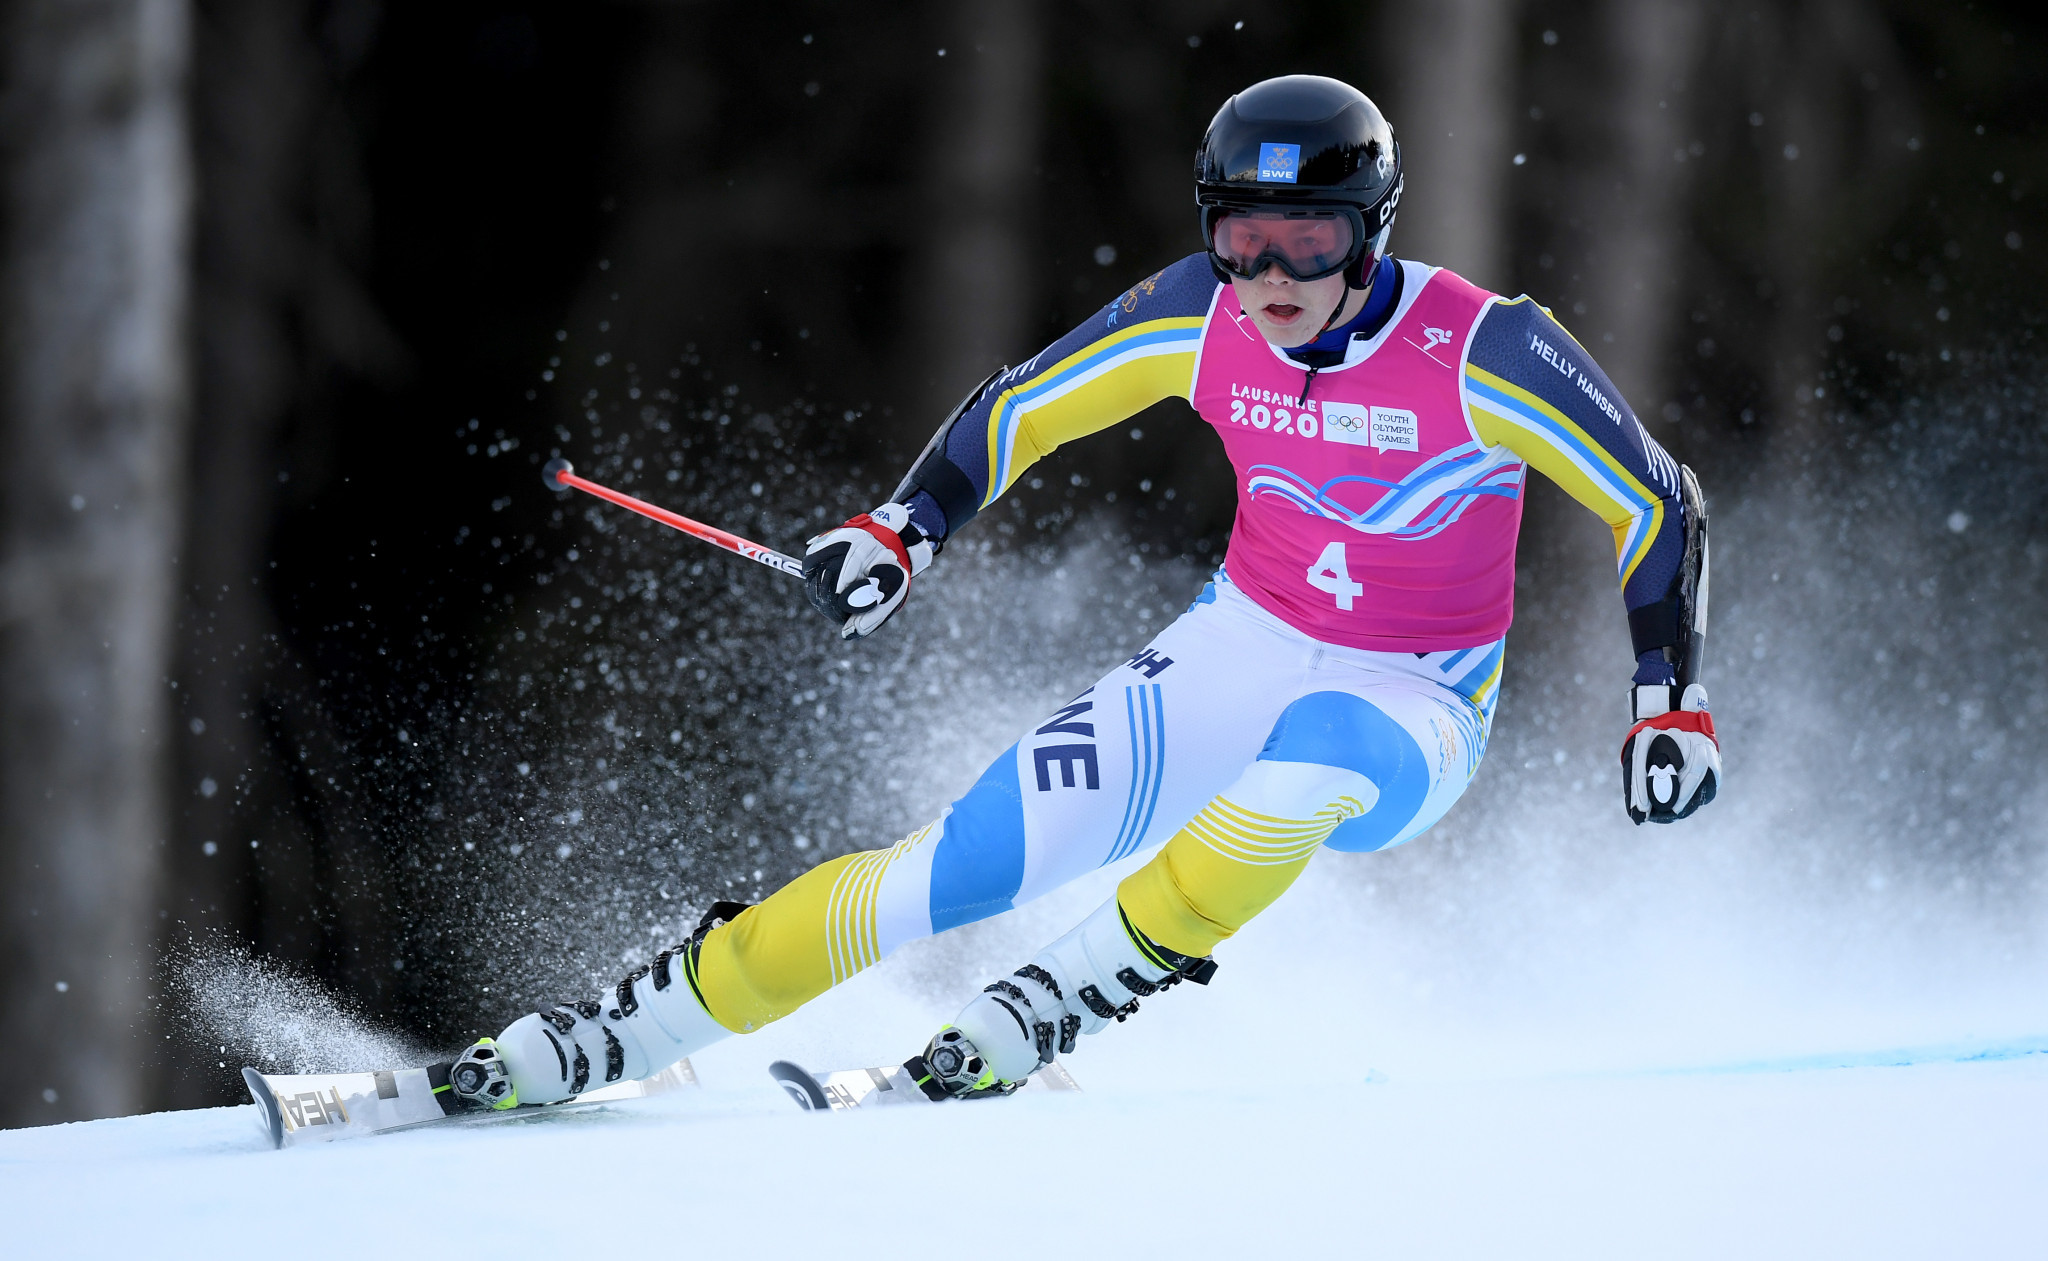 Swedish slalom skiers secure double gold at Lausanne 2020